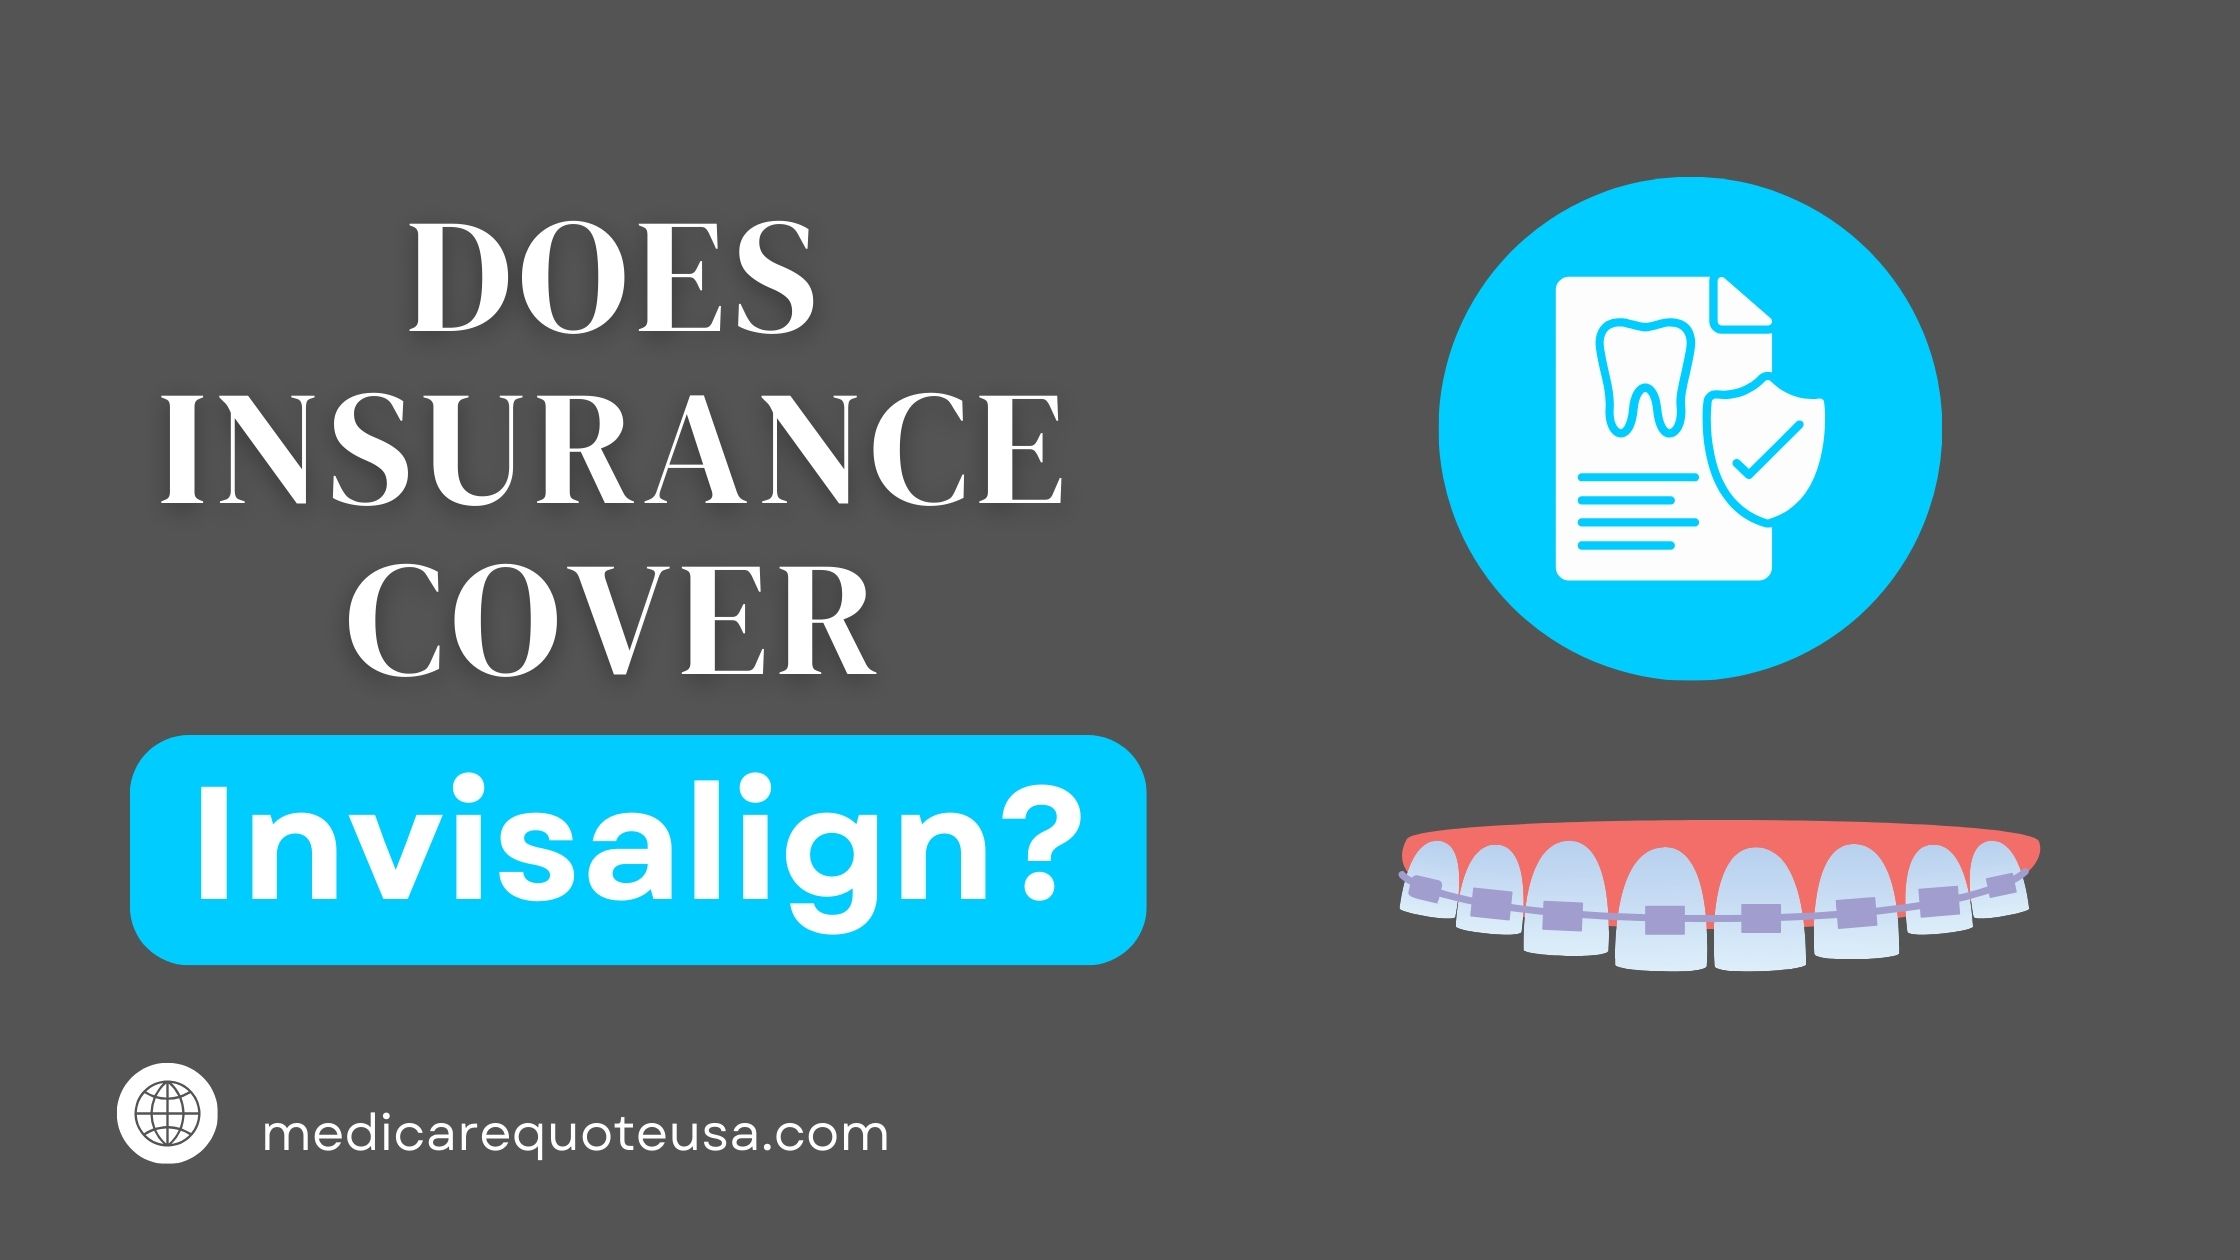 Does Dental Insurance Cover Invisalign in USA